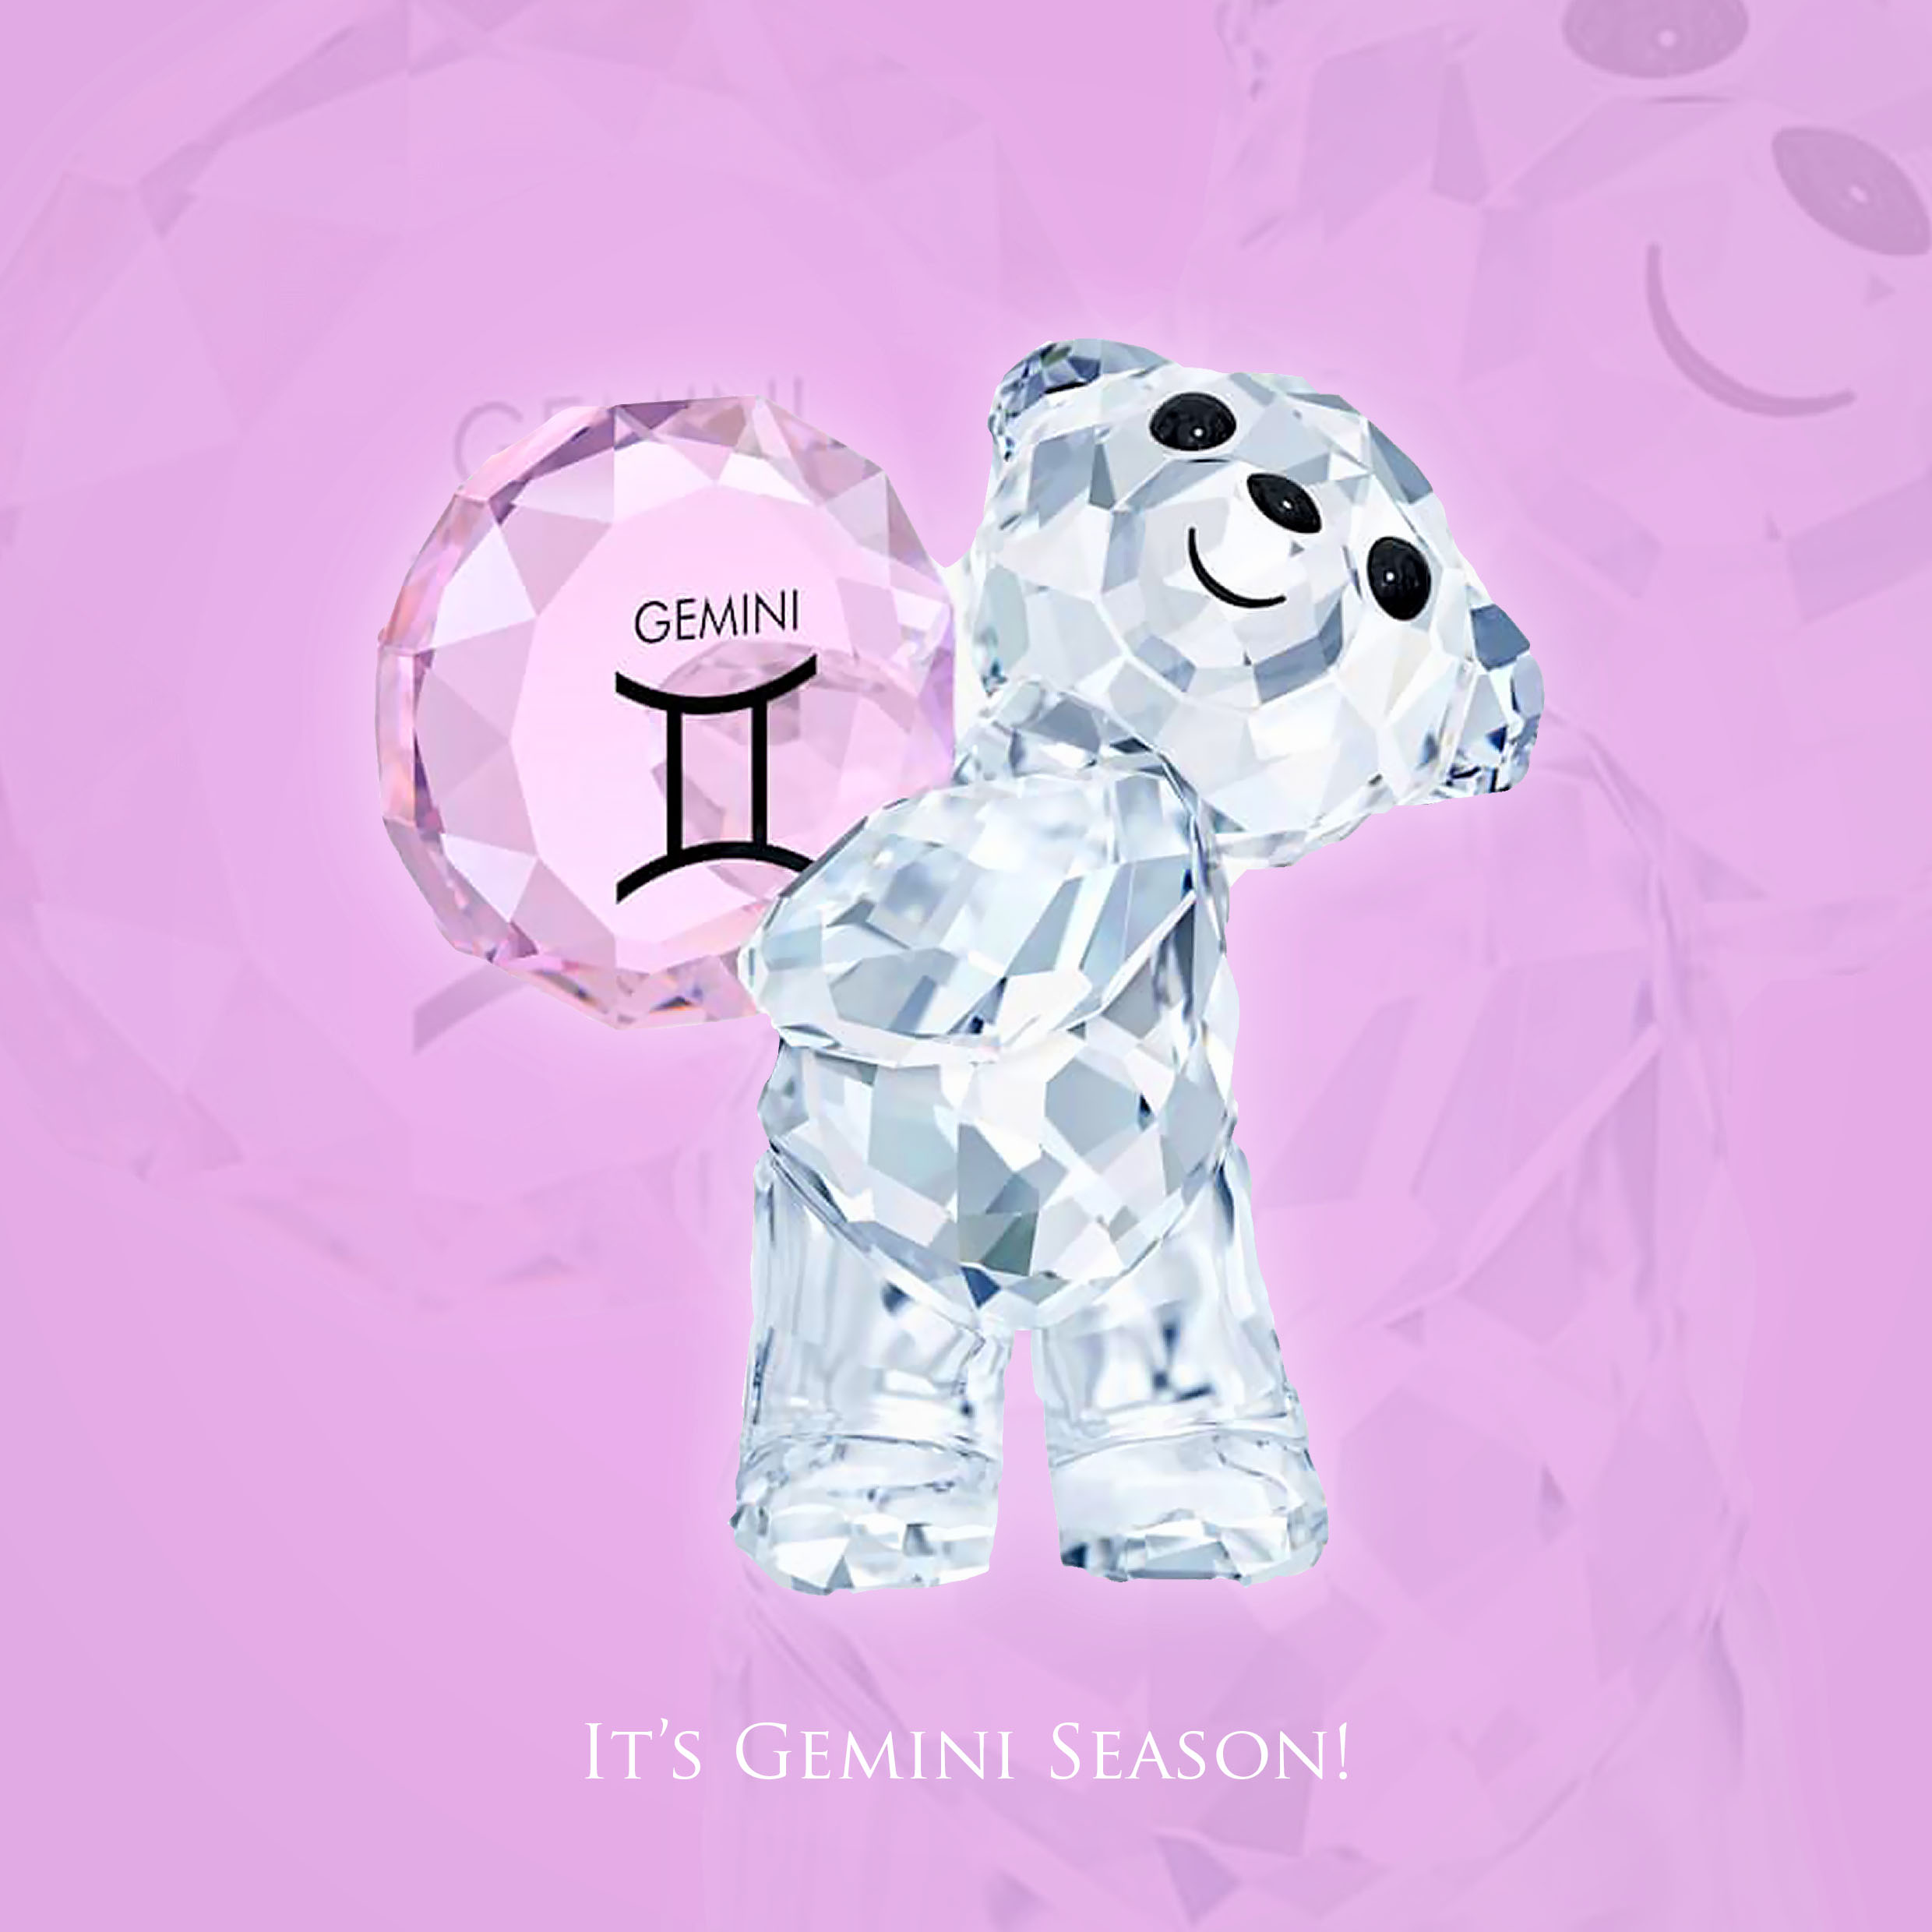 Delegatie bewonderen Bourgeon Swarovski Nigeria on Twitter: "Playful and curious, that's the Gemini way!  Show off your personality with our #Krisbear #zodiac decorations. Available  to shop in store and online. https://t.co/K18IHpLSRv" / Twitter